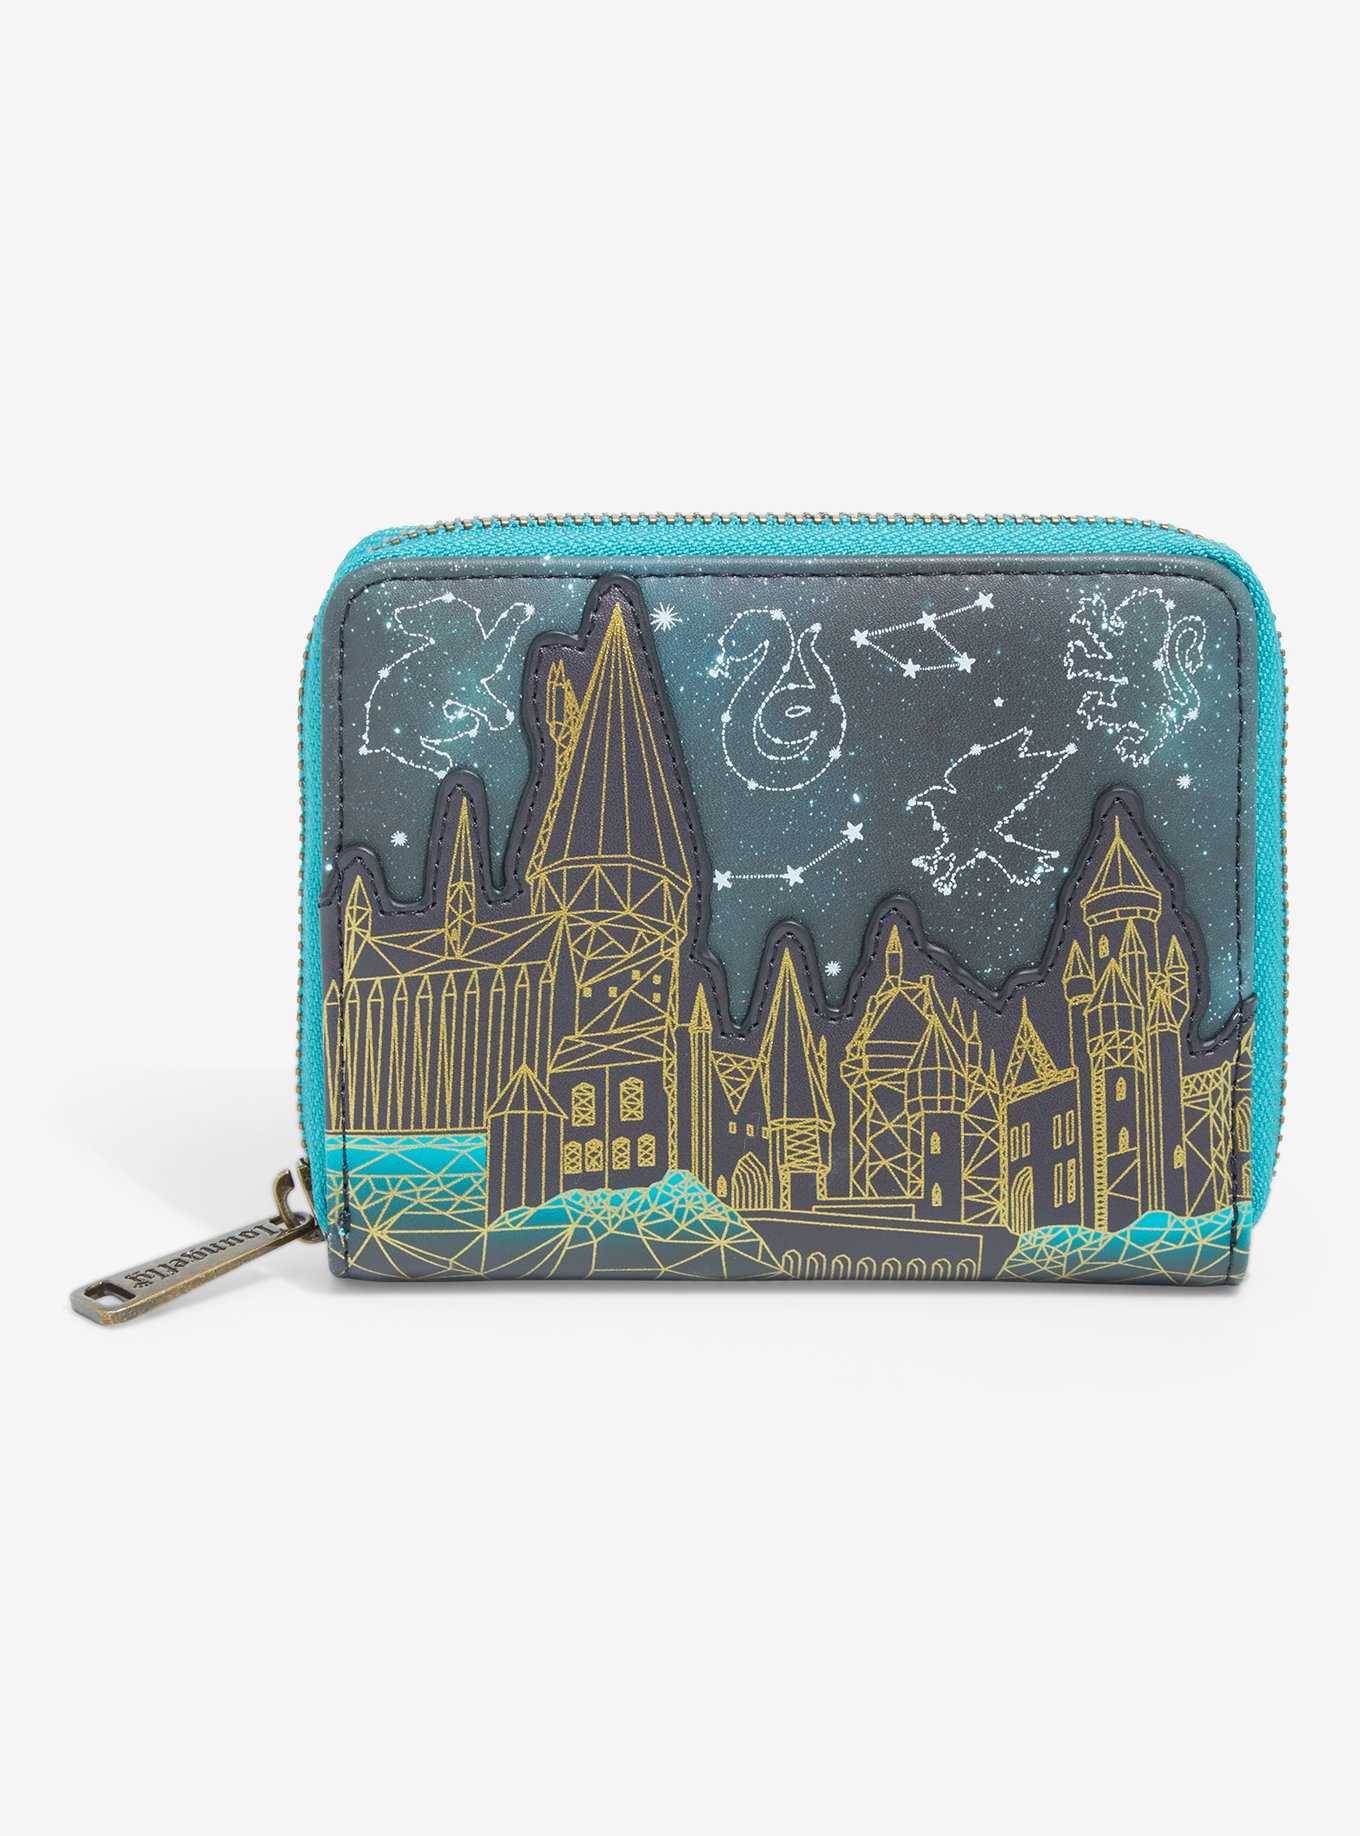 Harry Potter Stationery Set - BoxLunch Exclusive, BoxLunch